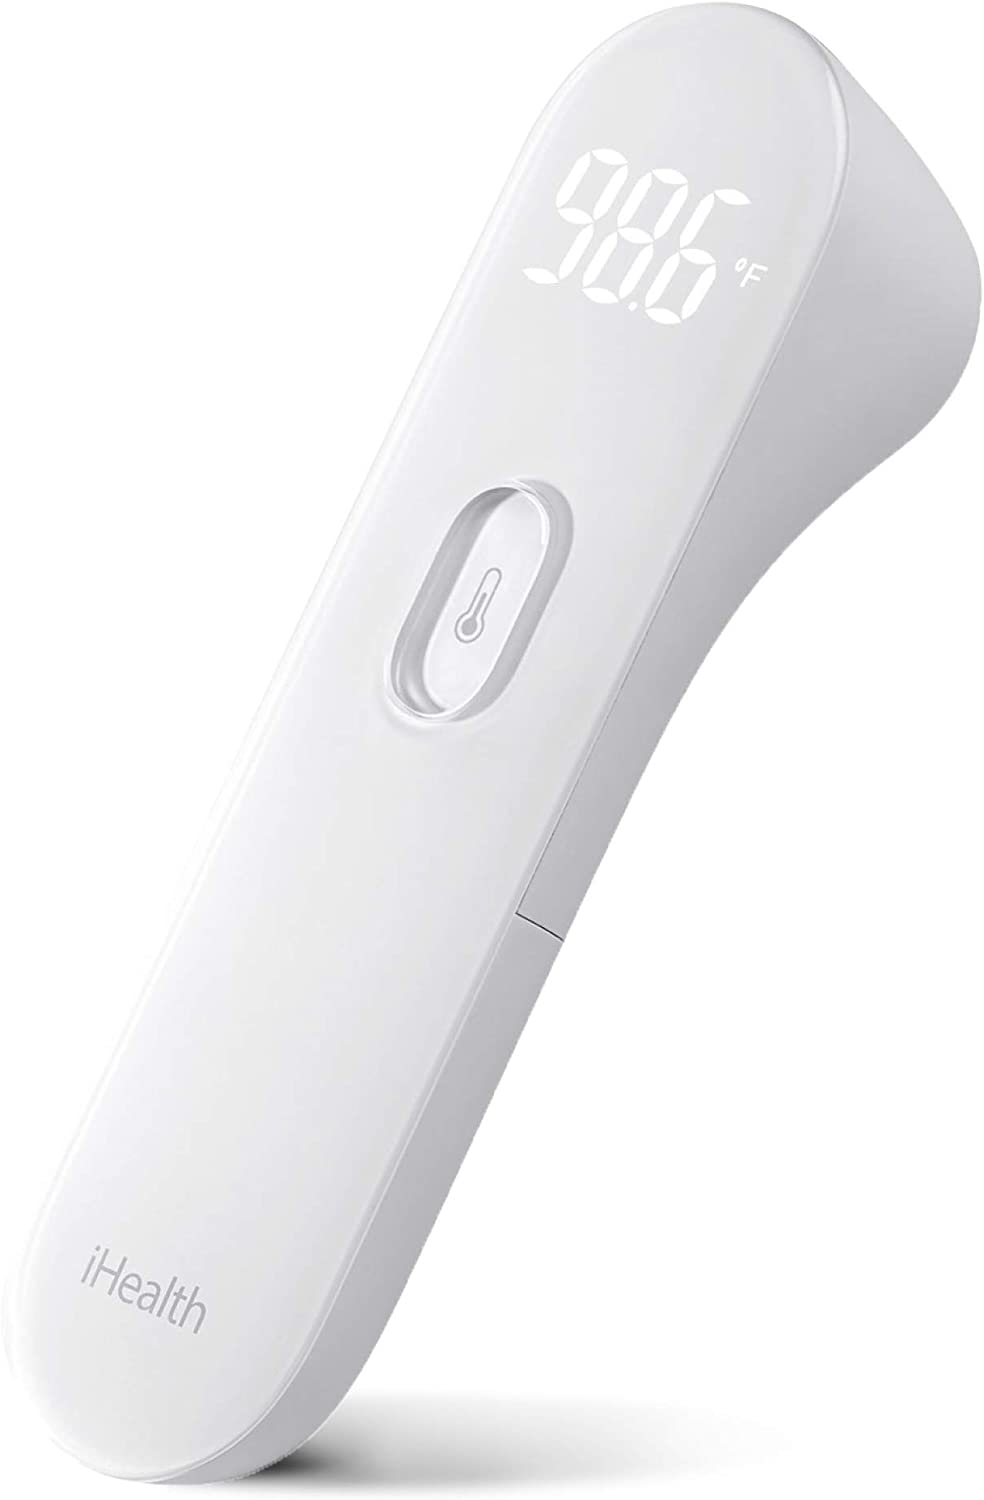 iHealth PT3 Infrared No-Touch Forehead Thermometer